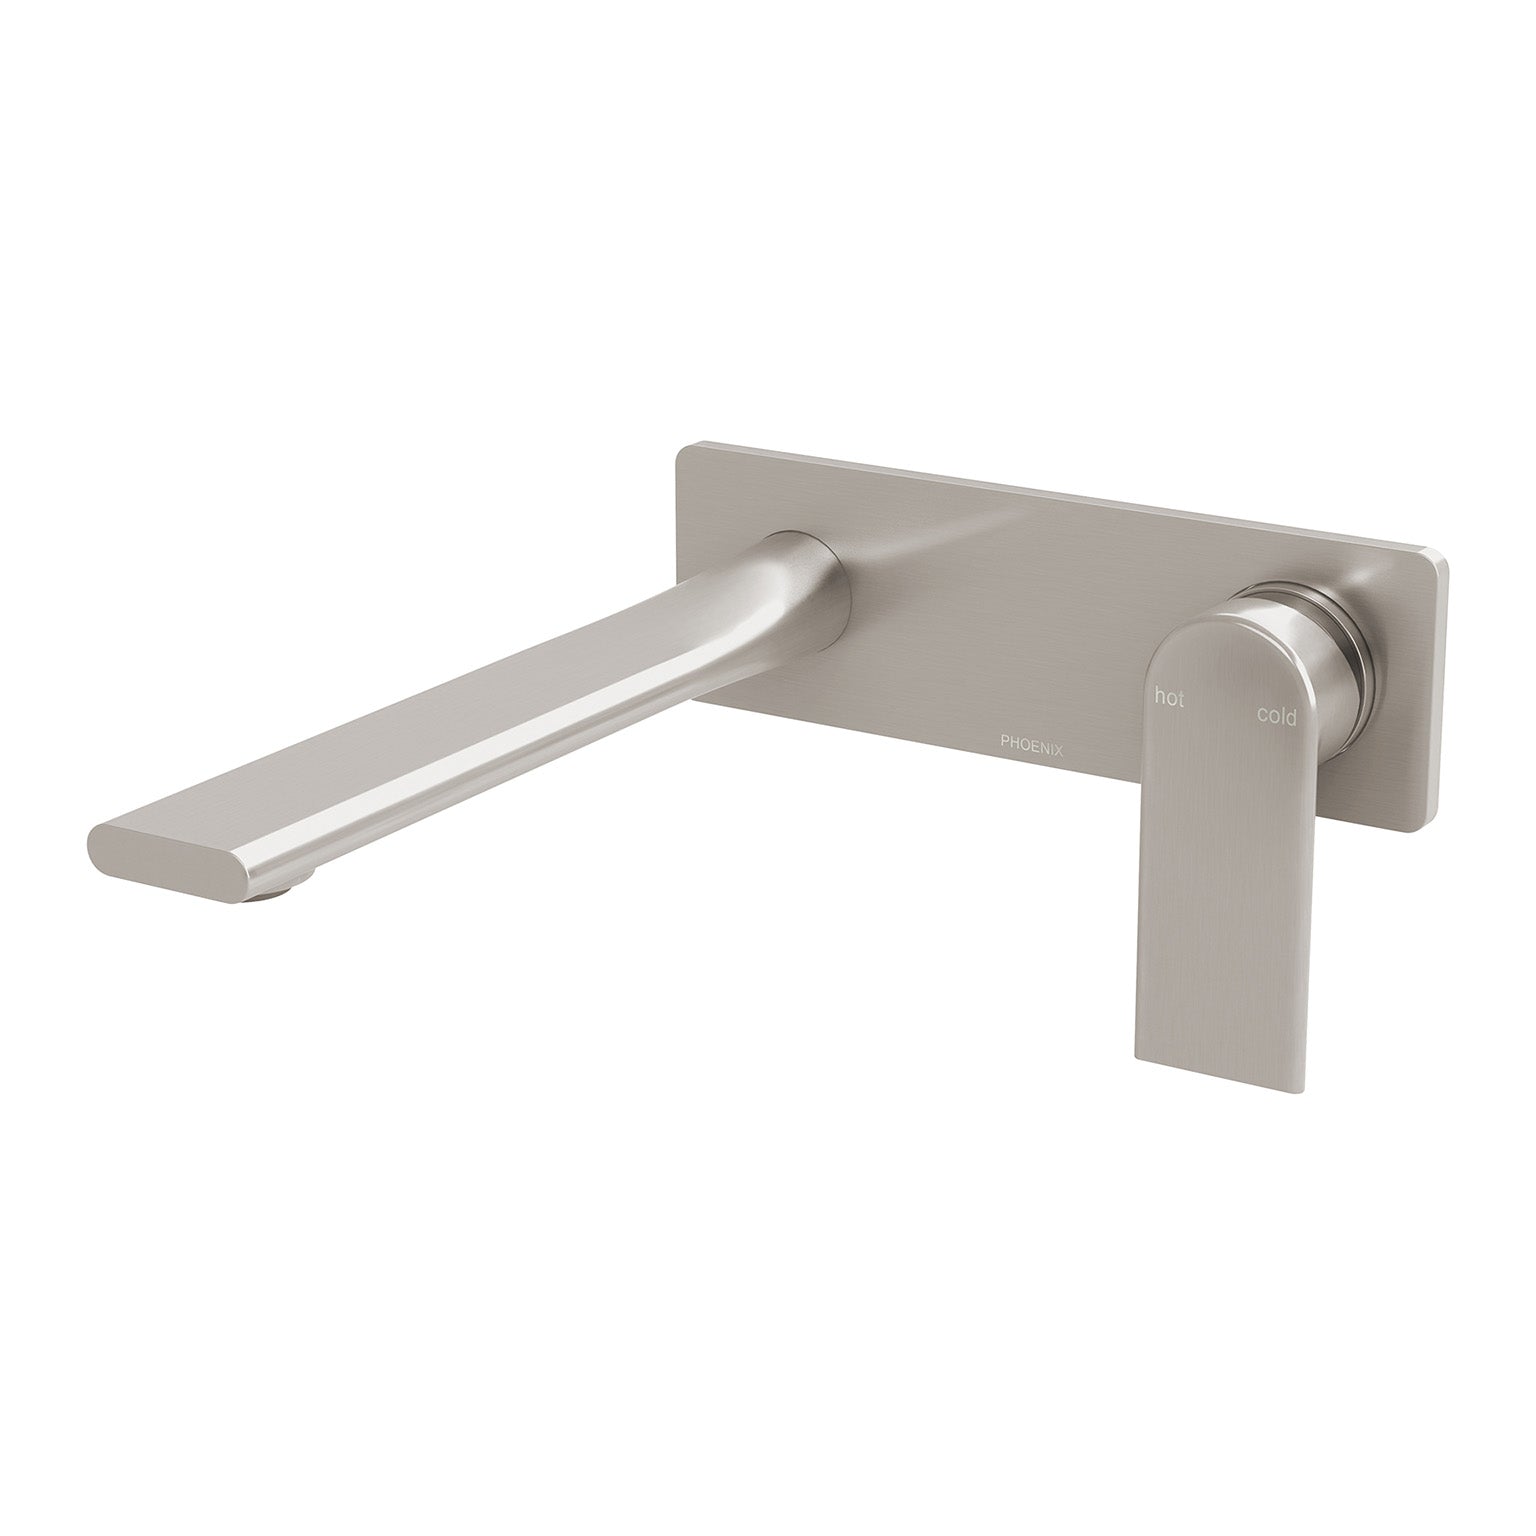 PHOENIX TEEL SWITCHMIX WALL BASIN / BATH MIXER SET FIT-OFF AND ROUGH-IN KIT 200MM BRUSHED NICKEL